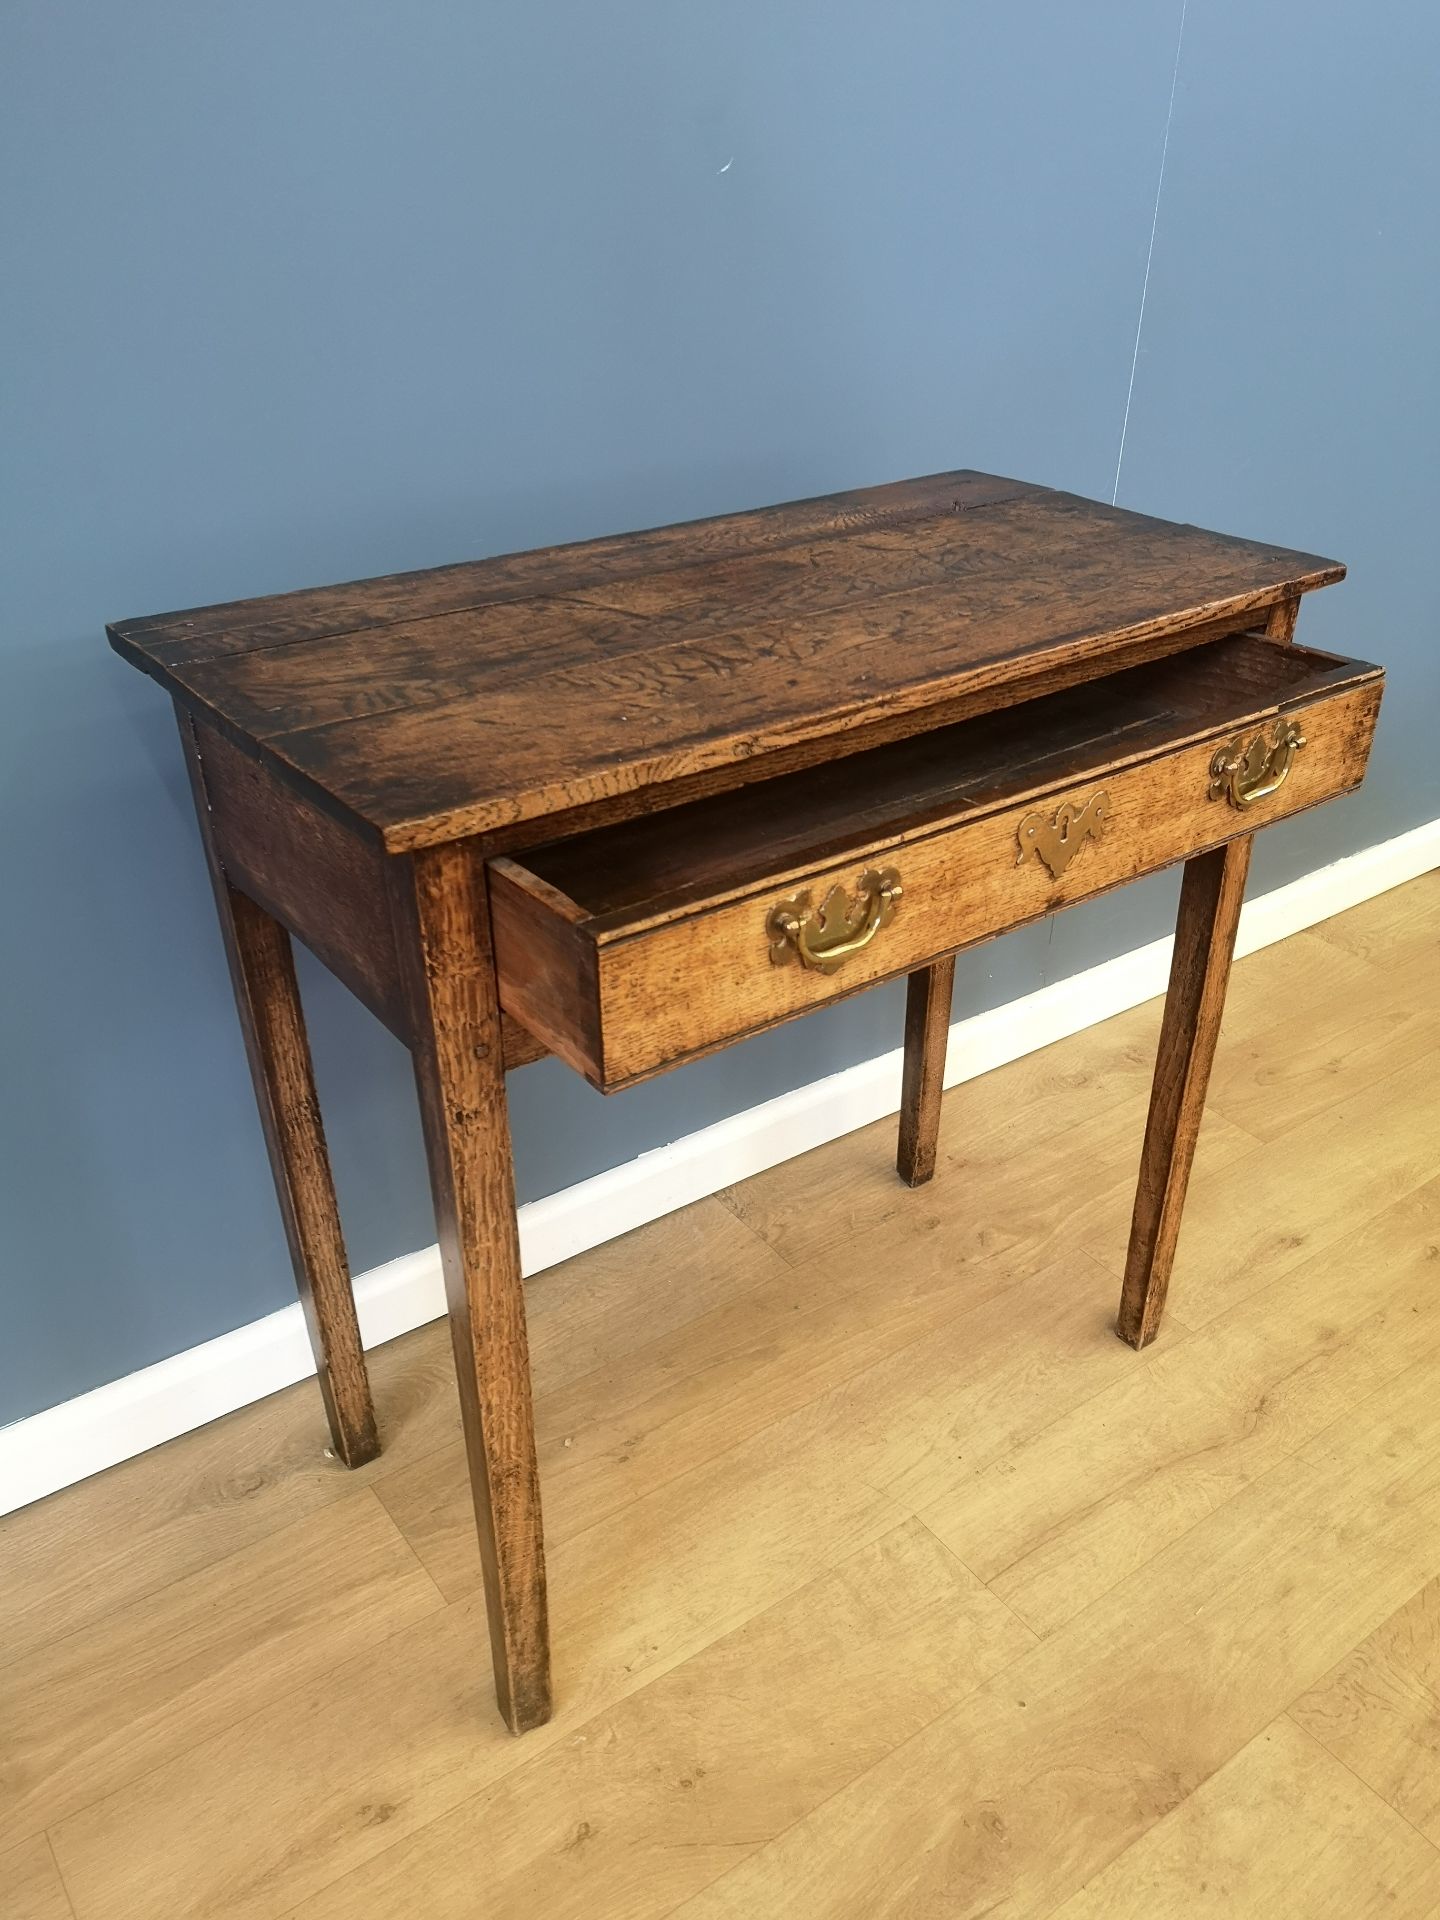 18th century oak side table - Image 6 of 6